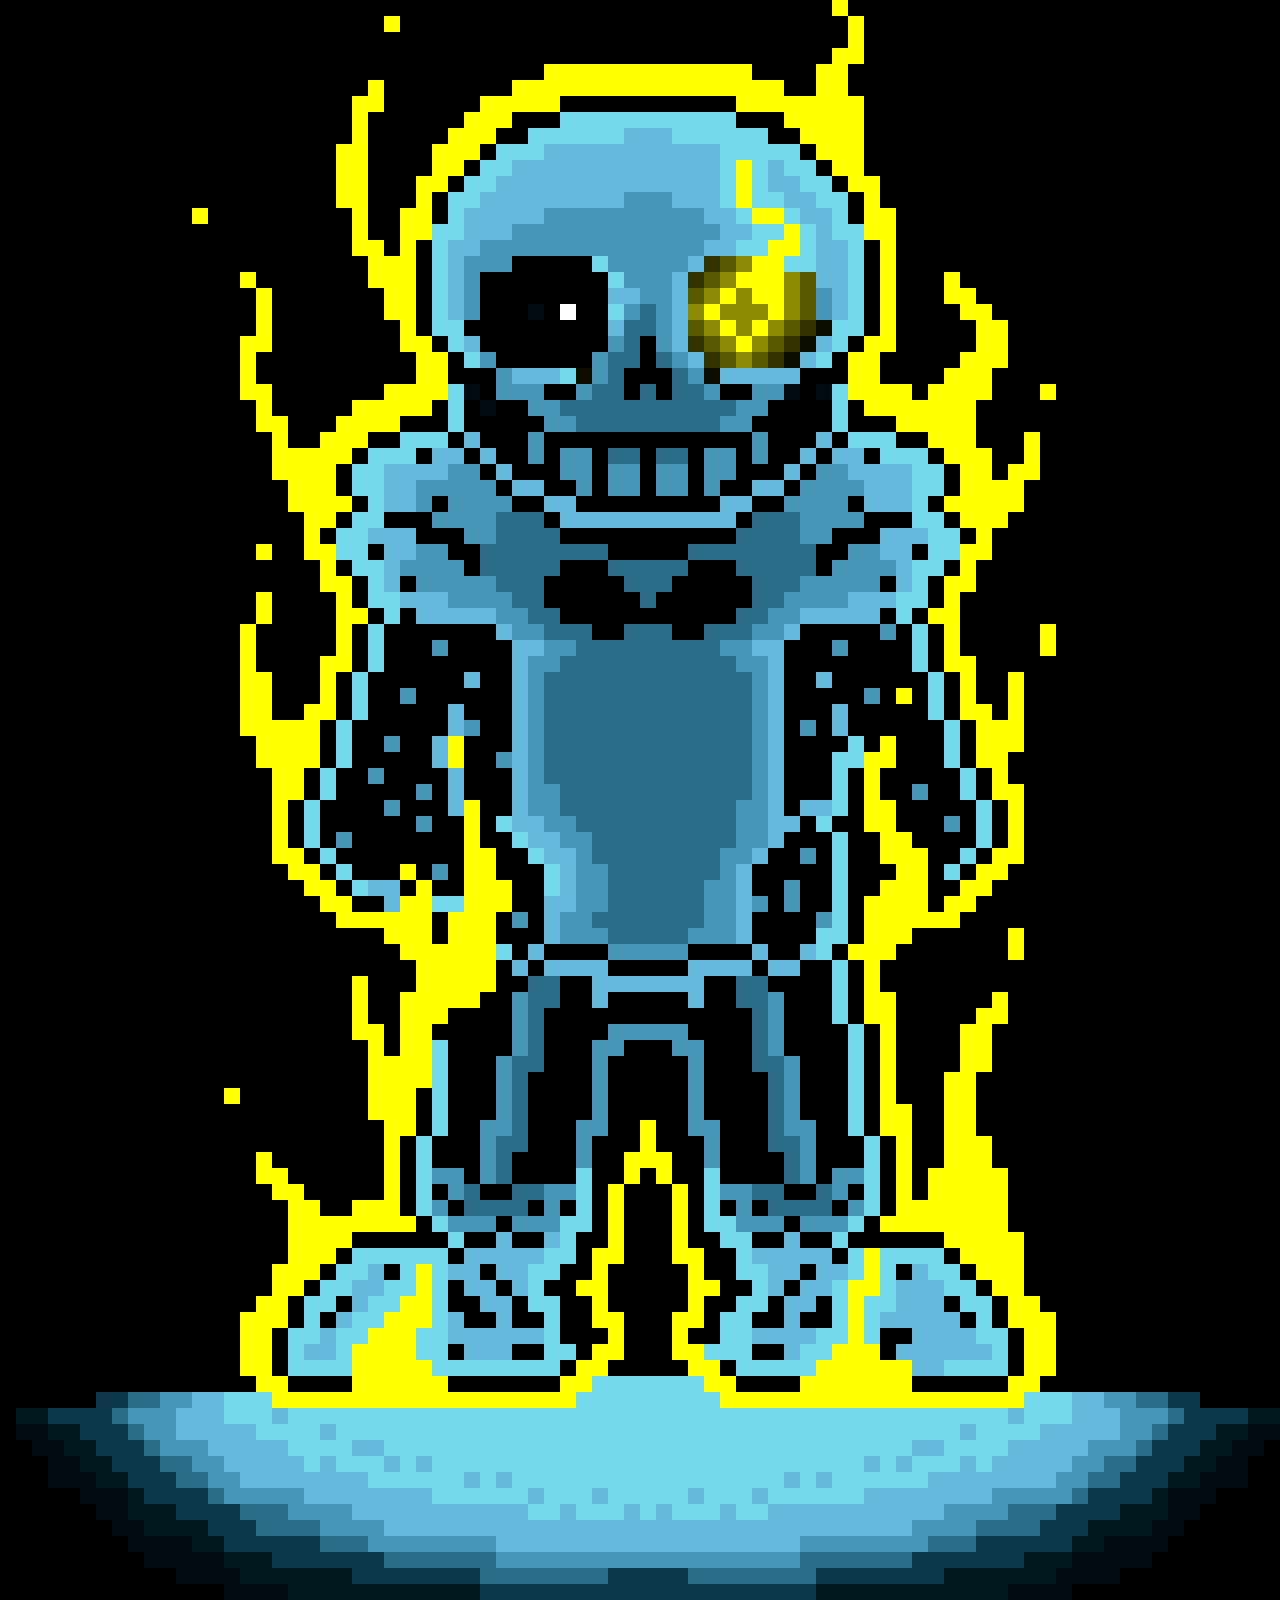 accurate ainavoL sans (credits to @burgy and @snas)